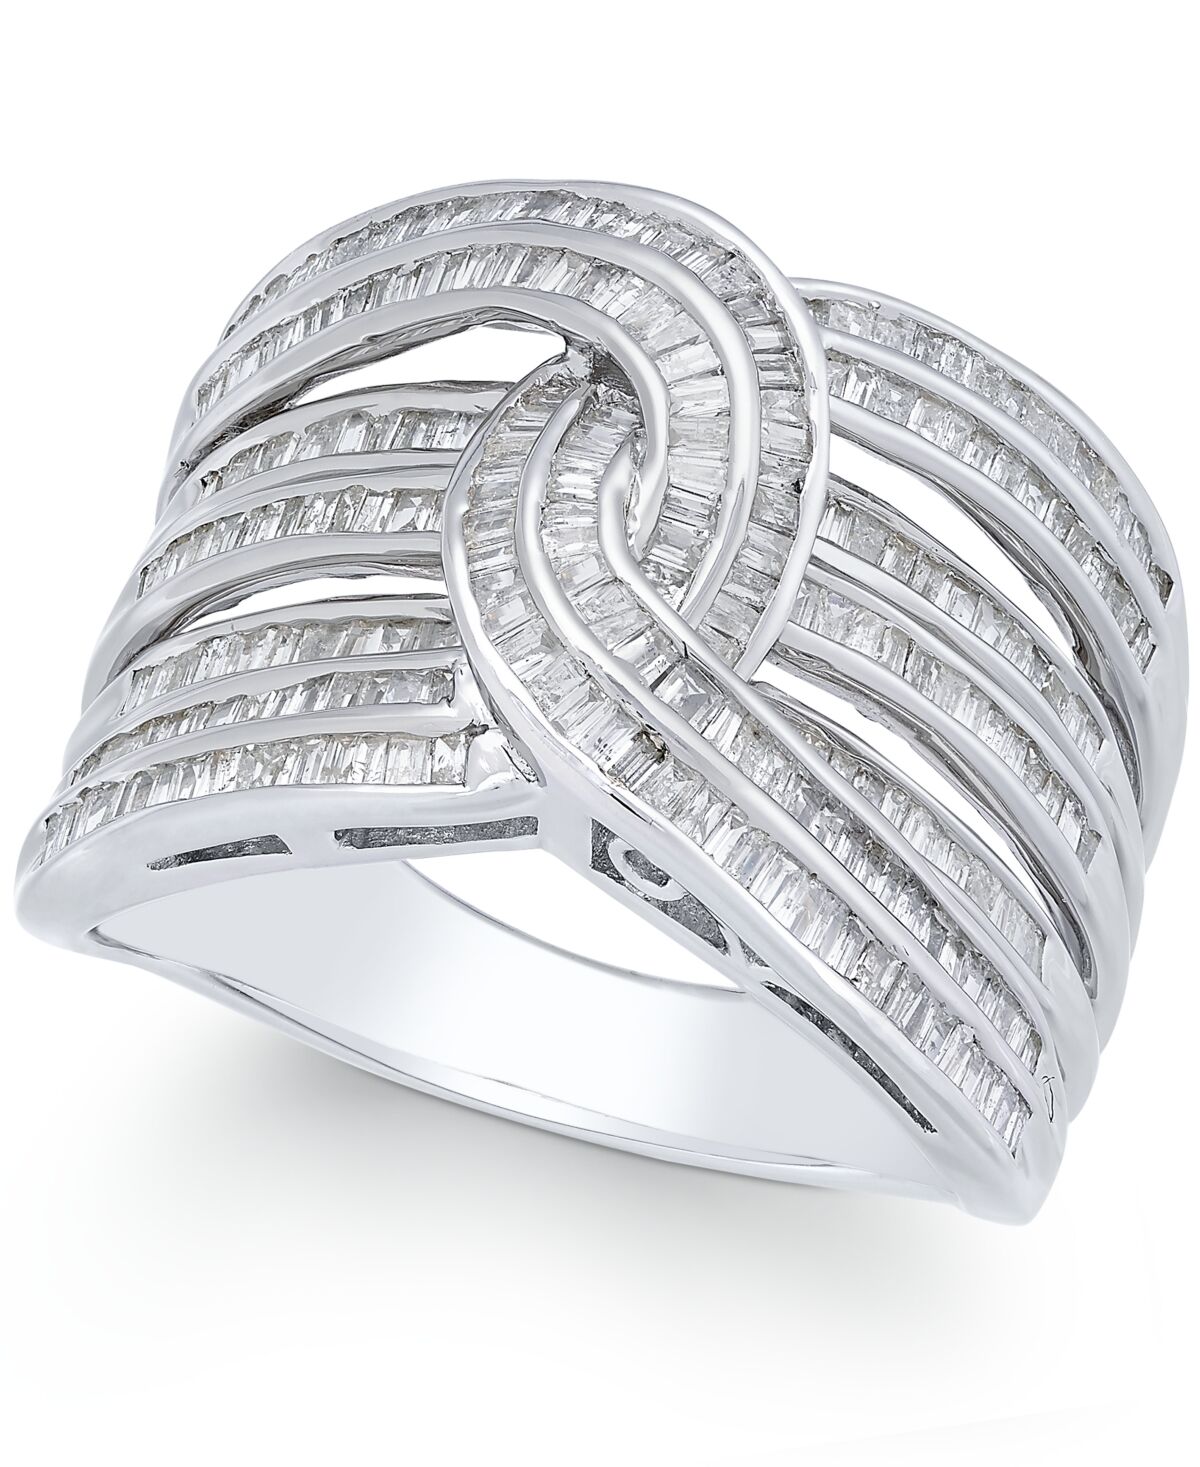 Macy's Diamond Baguette Interwoven Statement Ring (1 ct. t.w.) in Sterling Silver (Also available in Gold-Plated Silver or Rose Gold-Plated Sterling Silver)